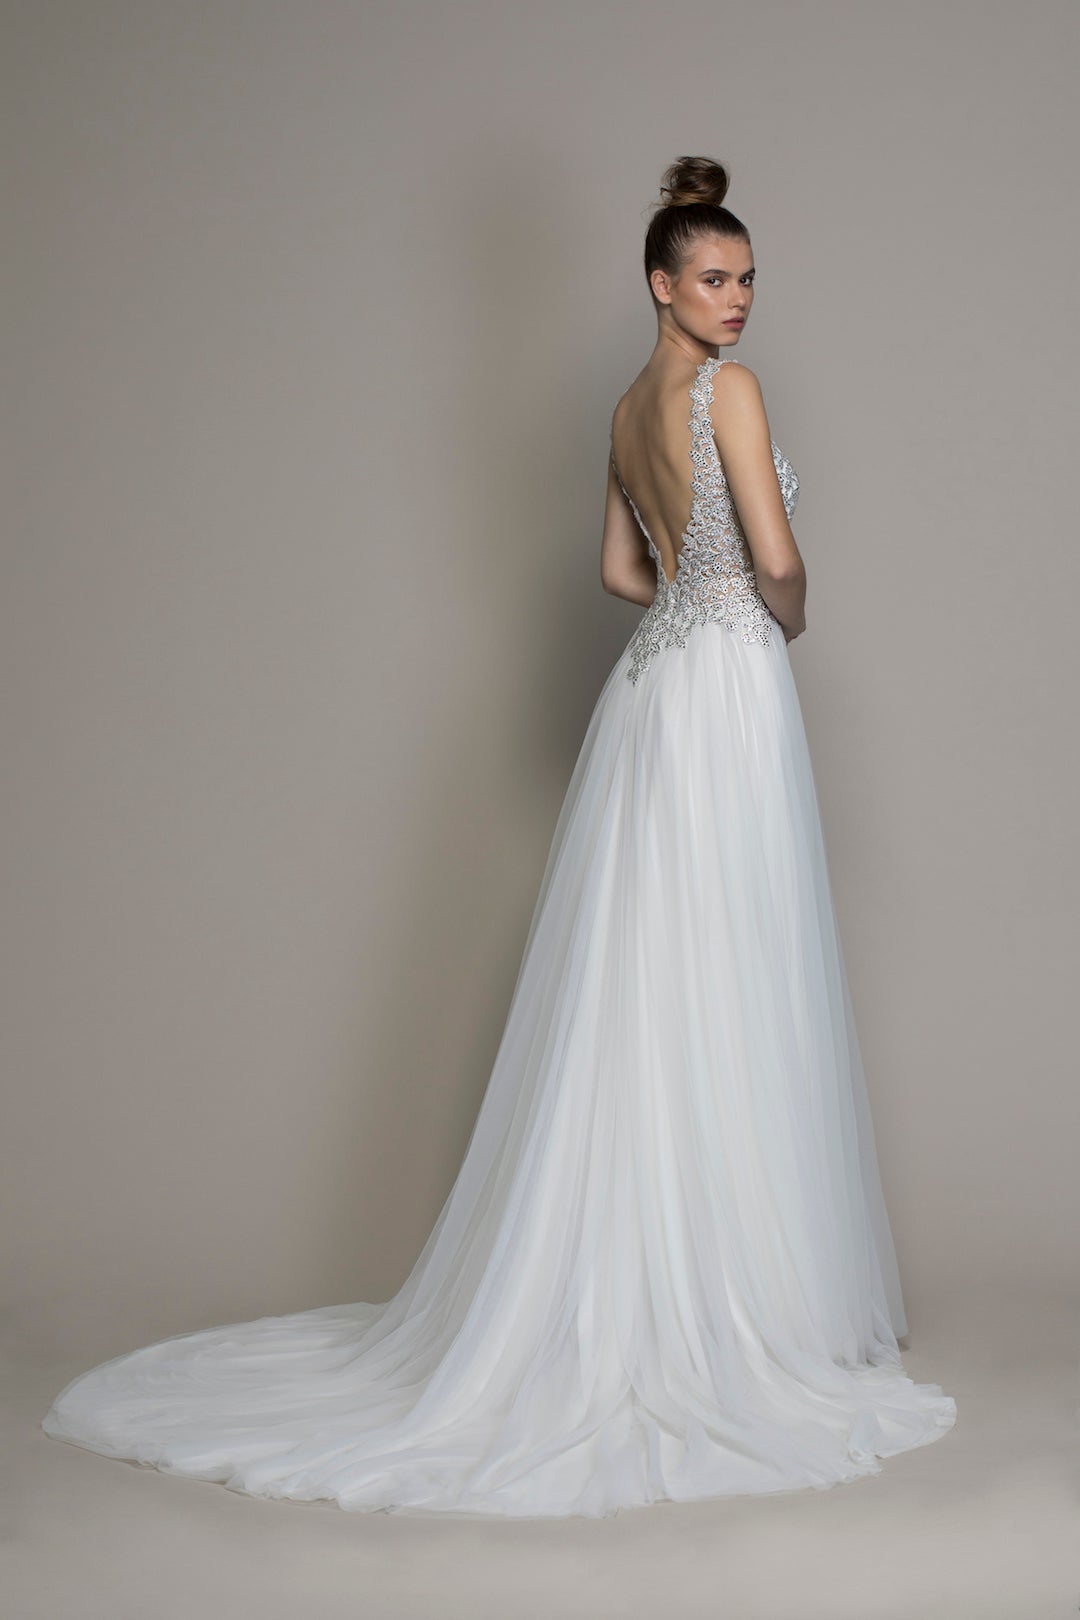 Pnina Tornai's new LOVE 2020 Collection is out! This is style 14743